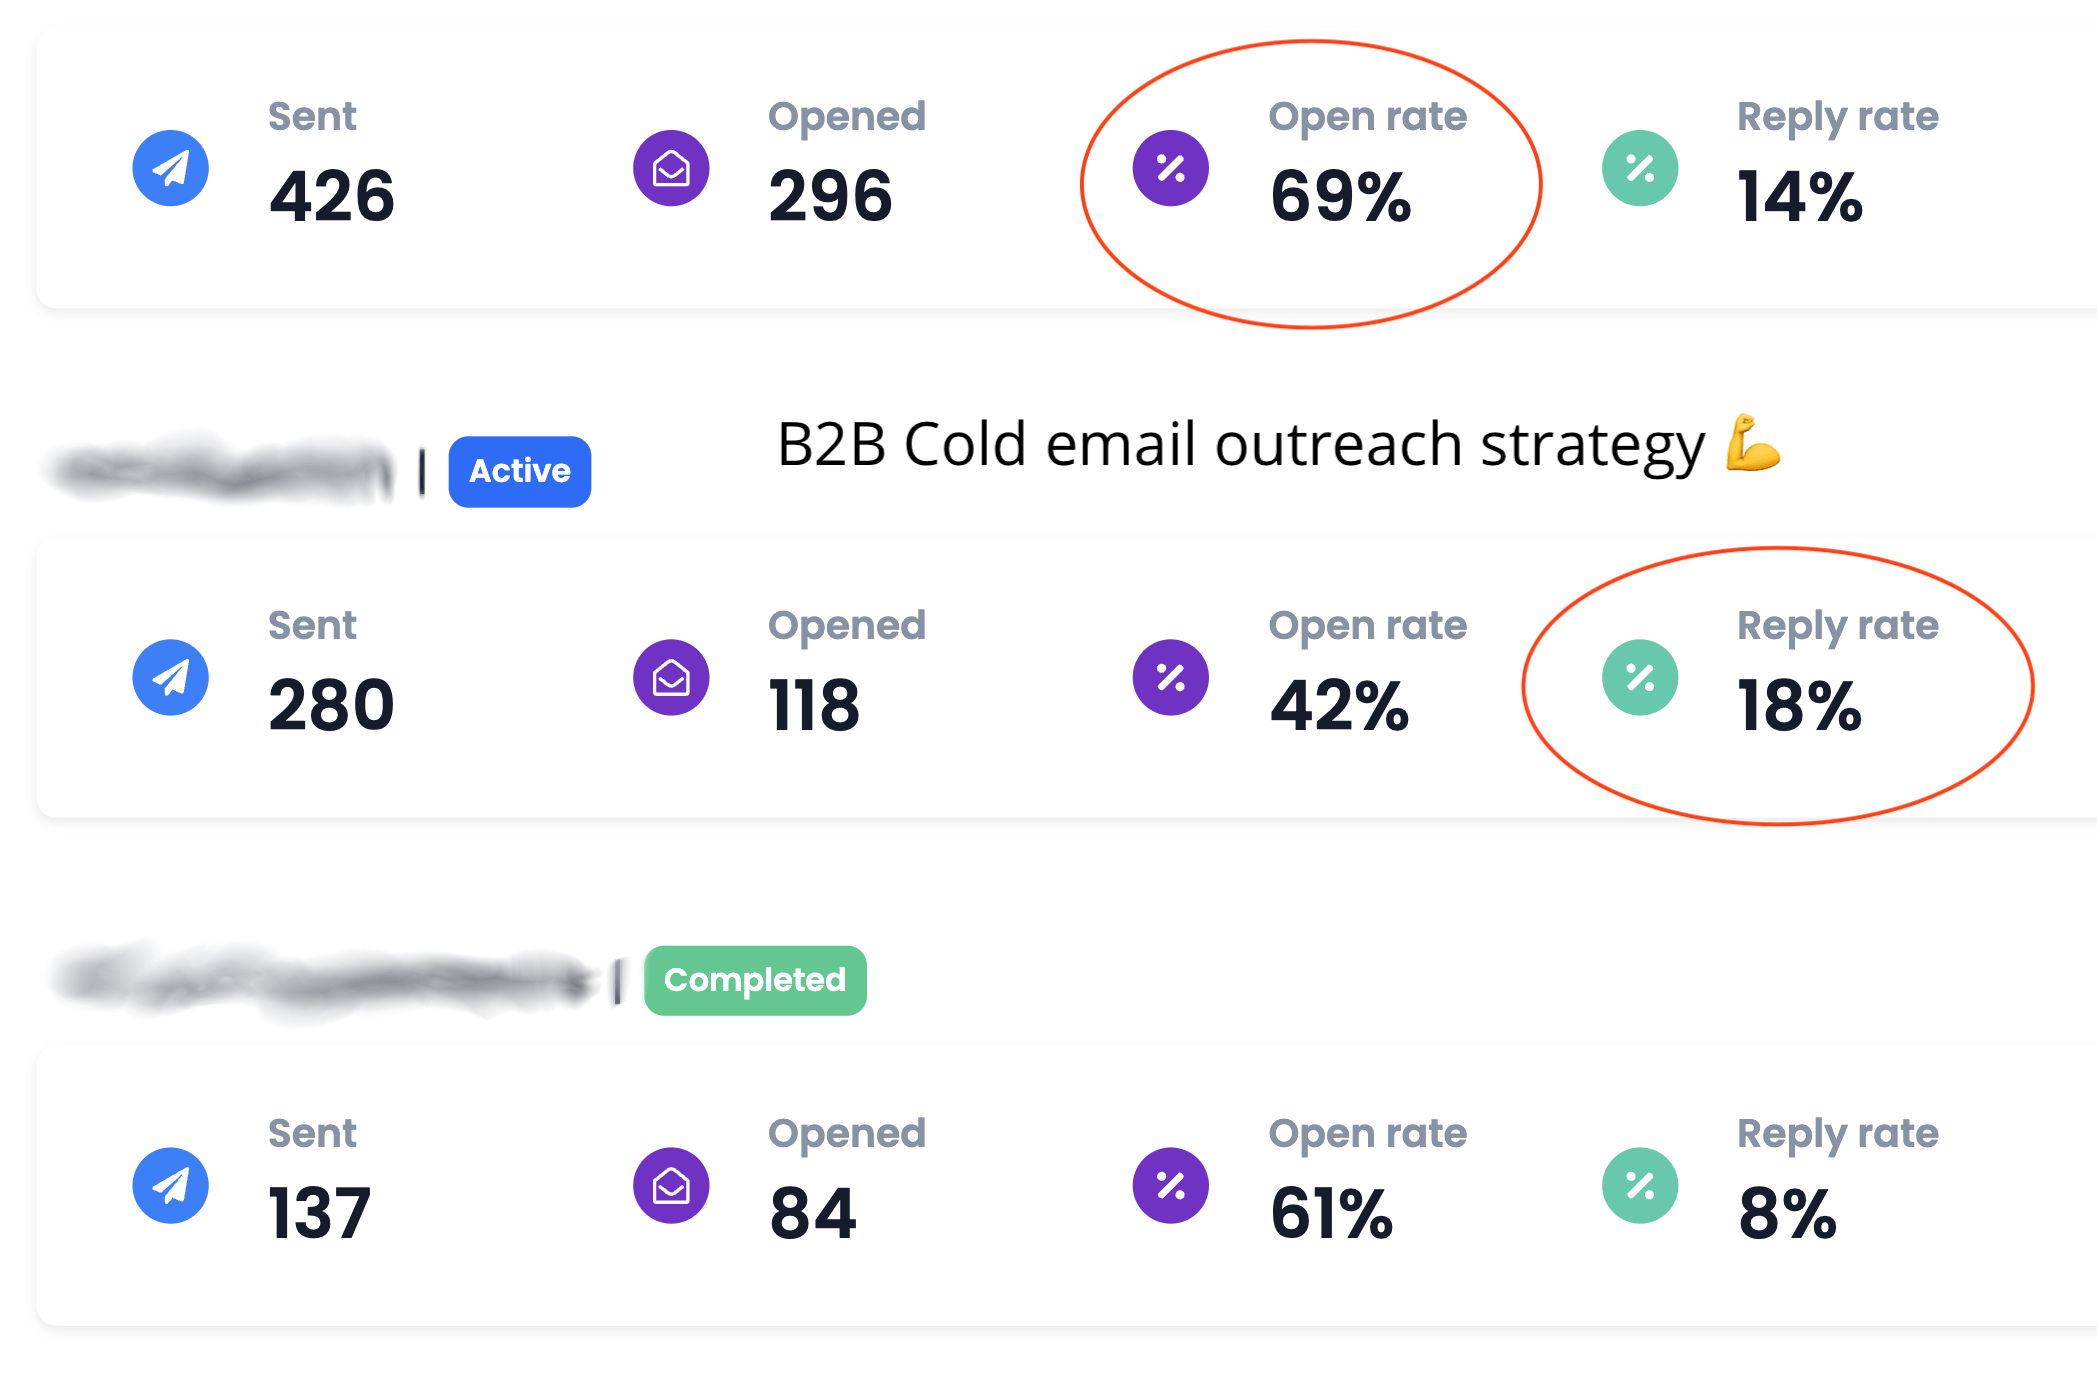 Twitter Marketing Agency Outreach Results